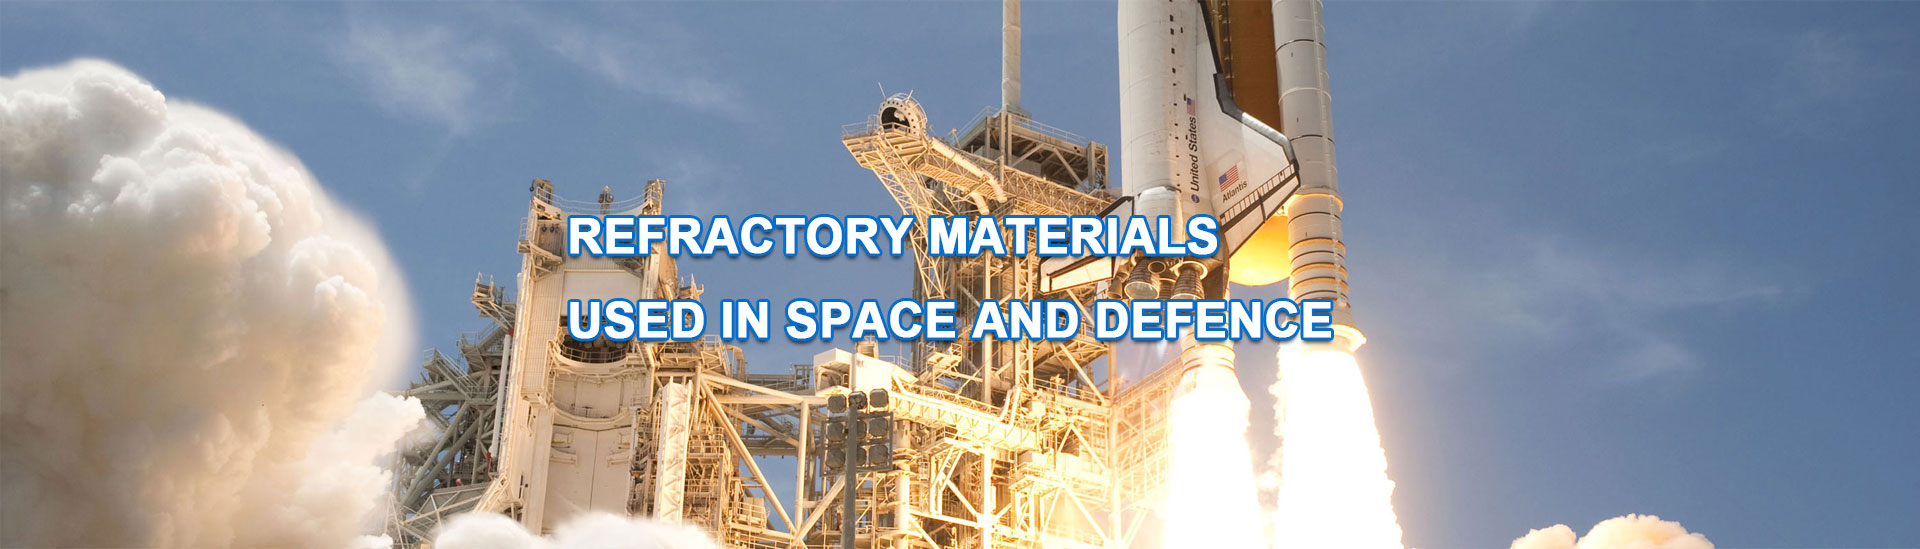 Refractory materials used in SPACE AND DEFENCE.